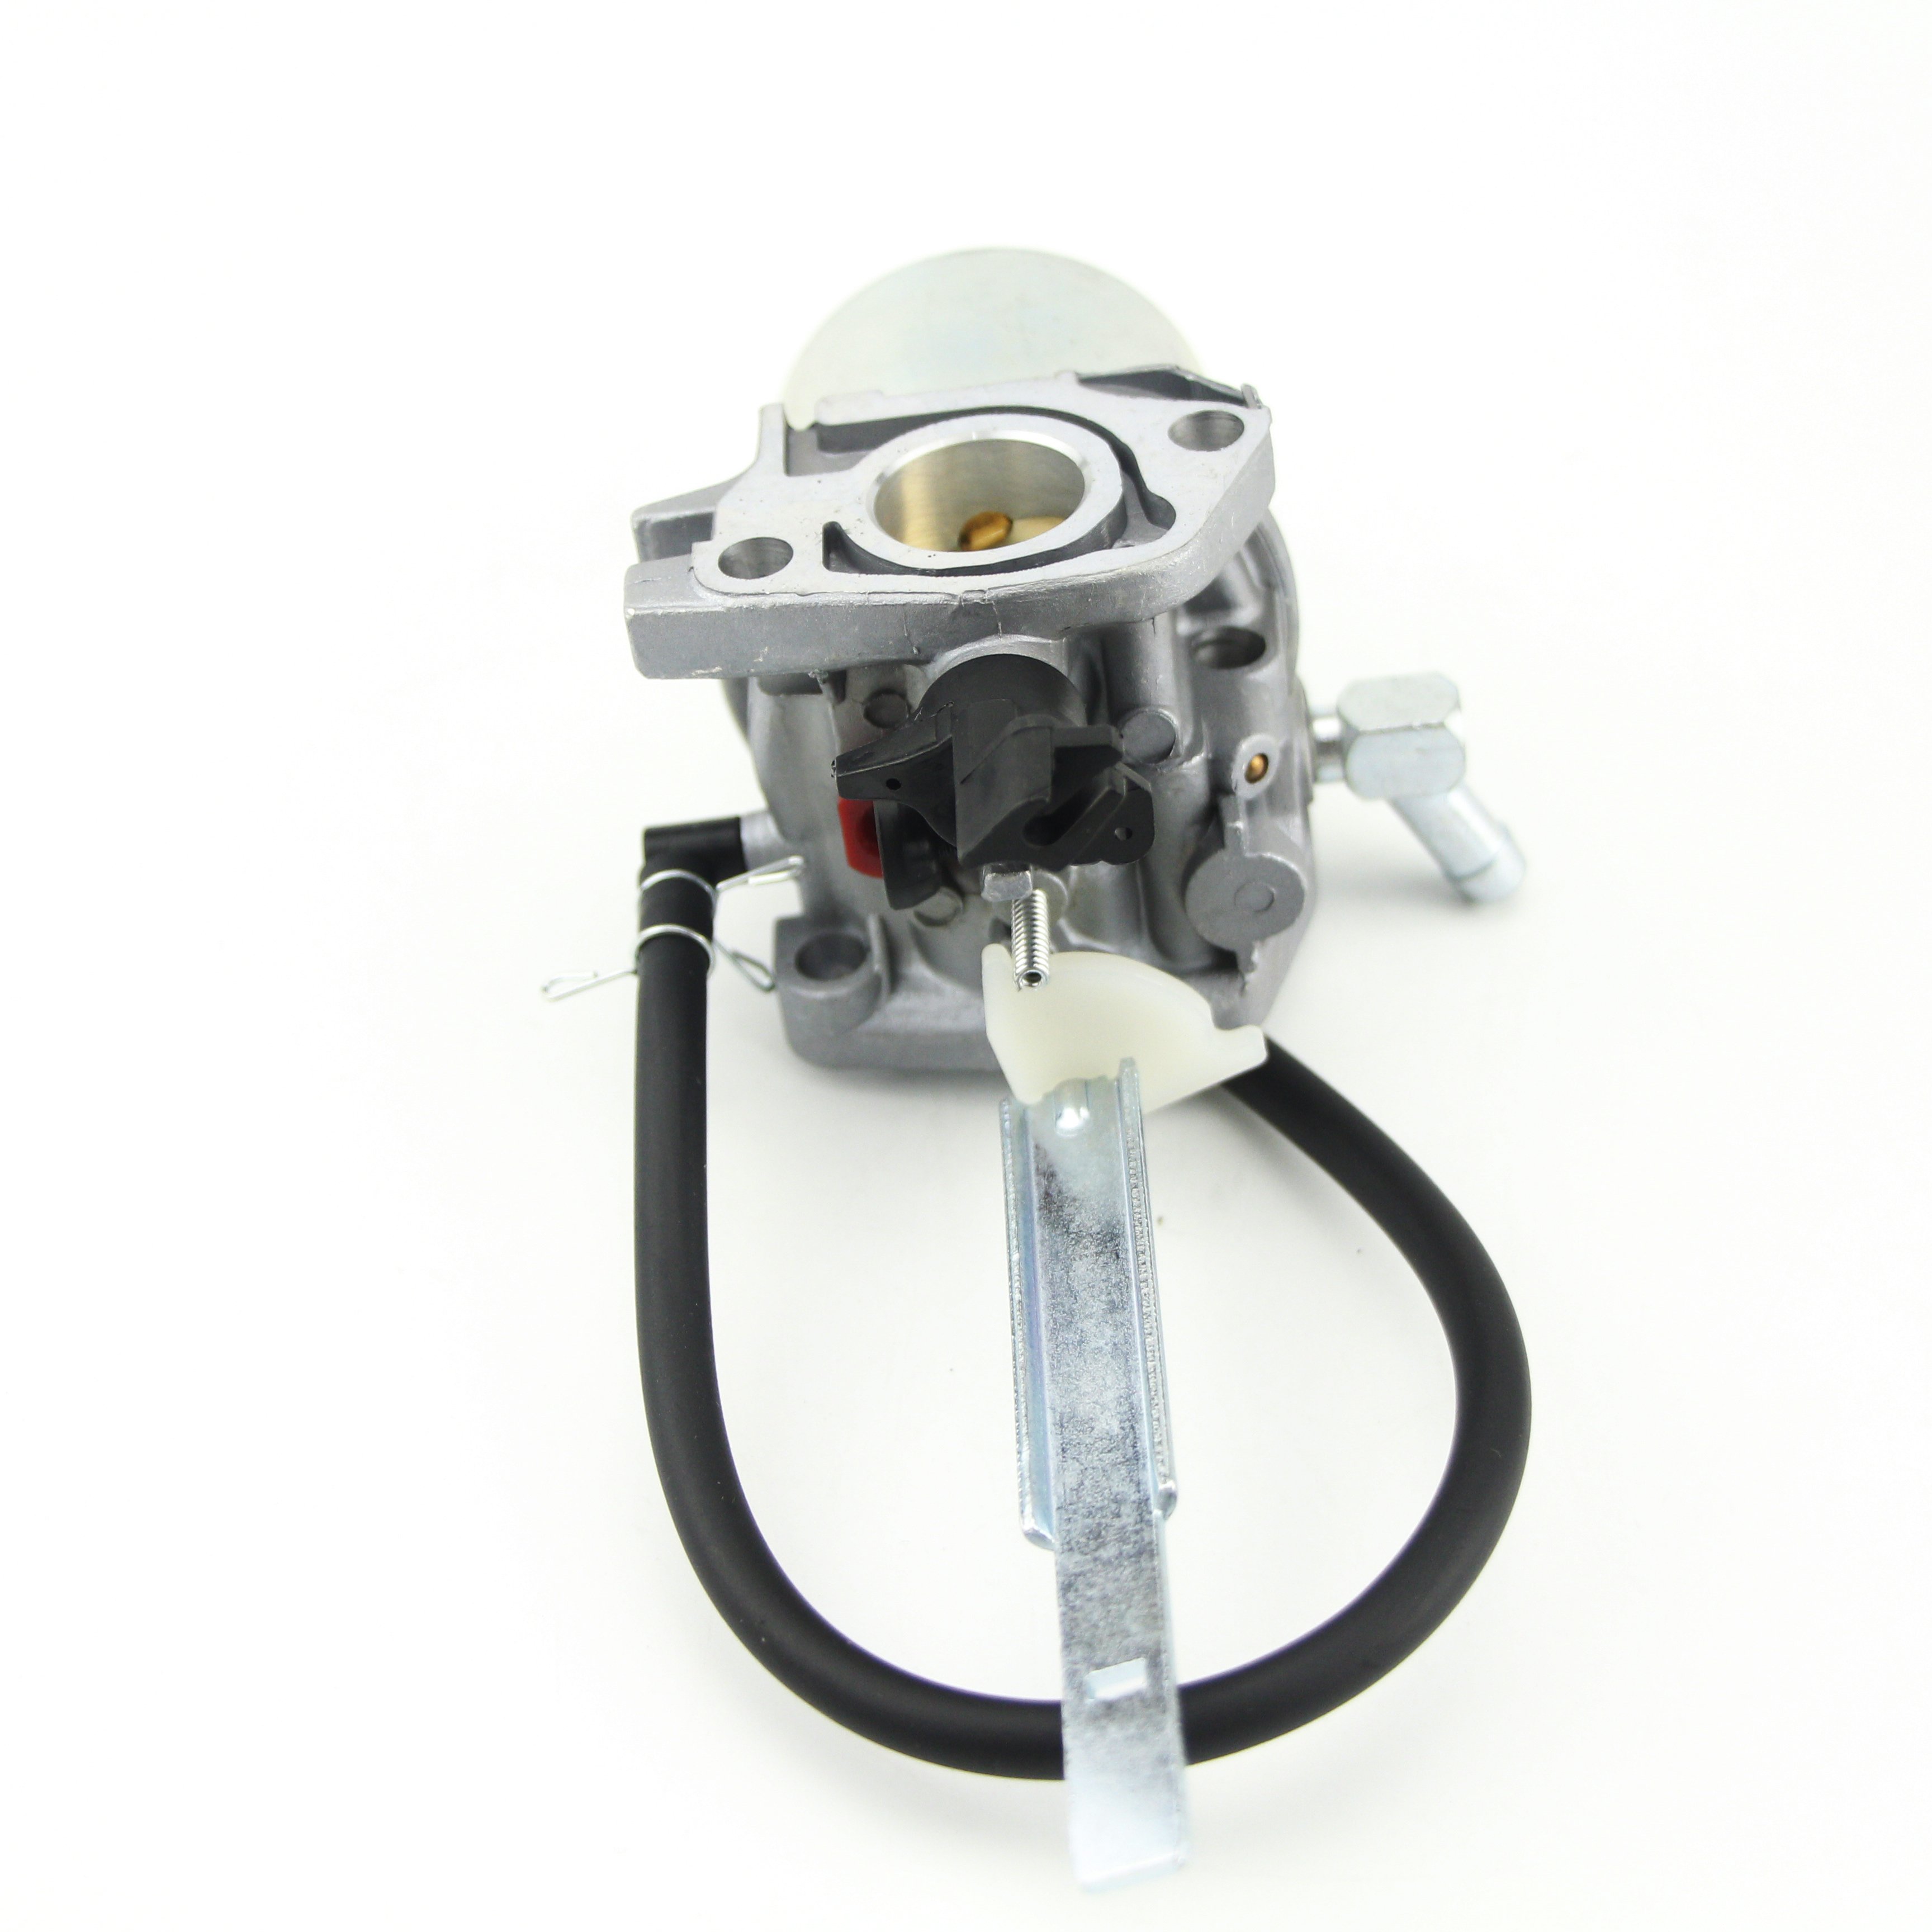 Carburetor For LCT 136CC 208cc Single Stage Winter Engines # Lauson 03131 Carby